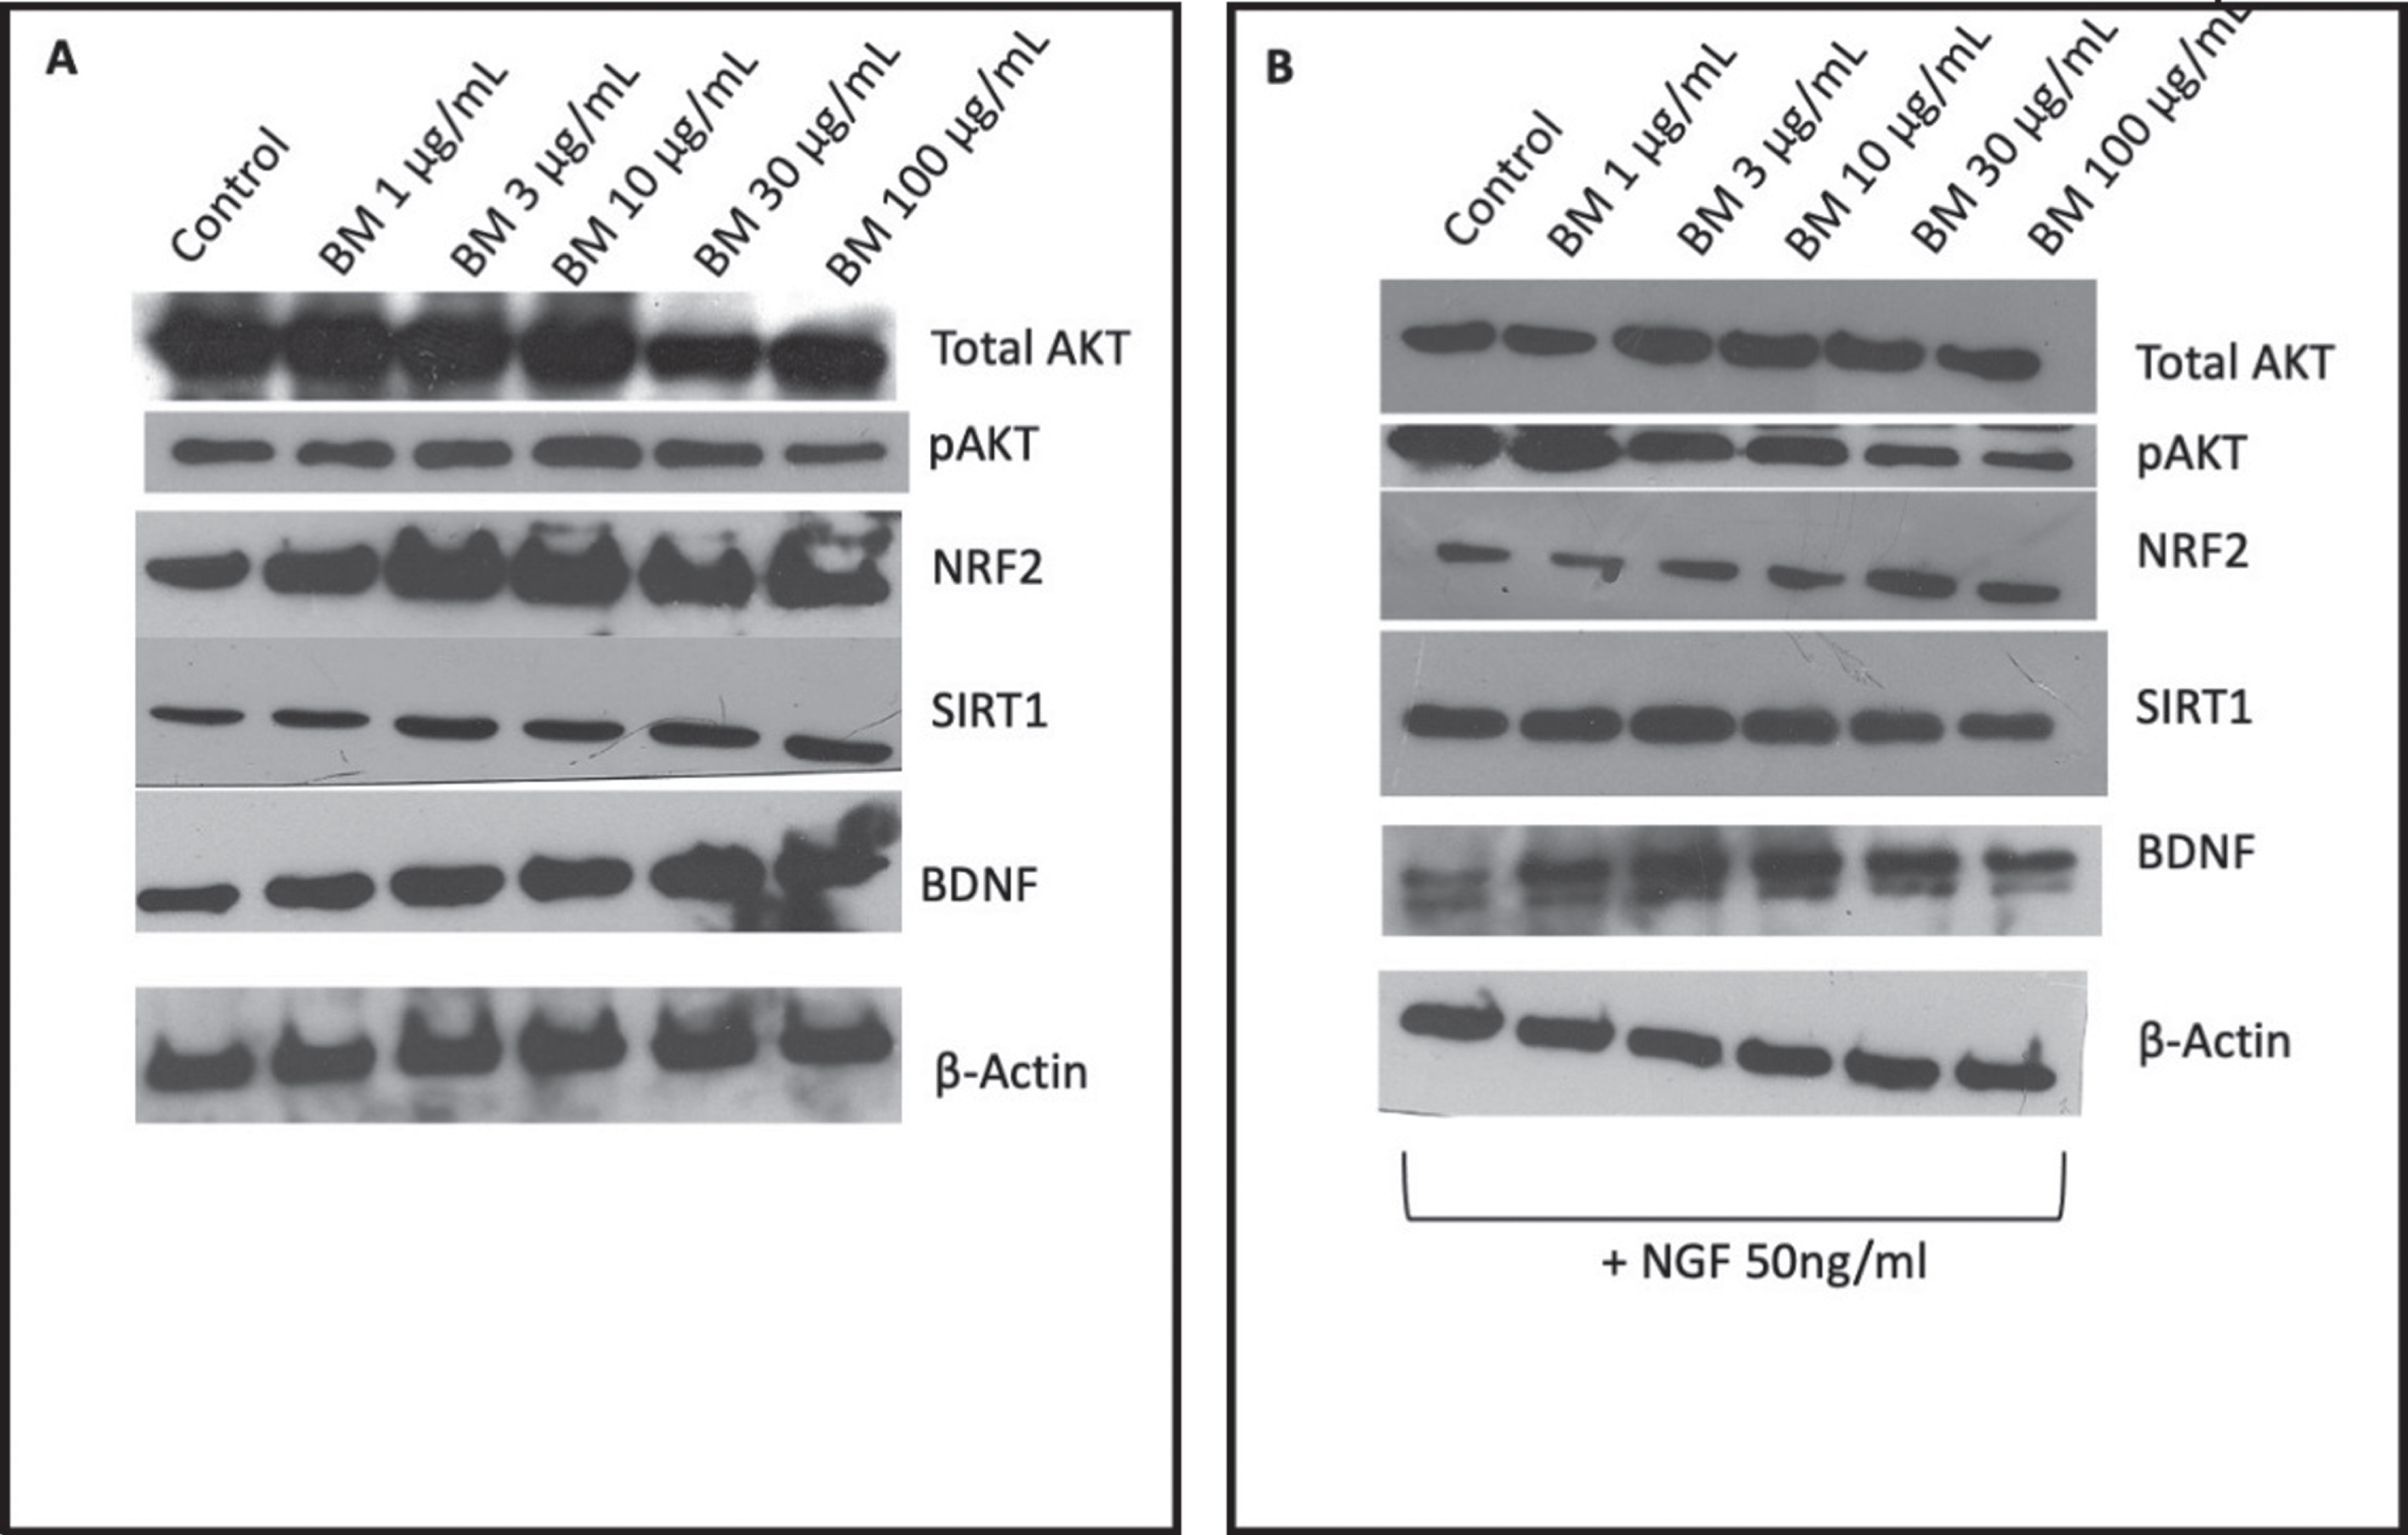 Representative images of western blot analysis of PC-12 cells protein expression in response to varying concentrations of BM A in the absence of NGF; B in the presence of 50 ng/ml NGF. C Densities analyzed with Image J from three independent repeats in the presence of BM and absence of NGF. D Densities analyzed with Image J from three independent repeats in the presence of BM and NGF. The significant difference in protein expression measured by ANOVA followed by Dunnett’s post hoc test. (*p < 0.05, **p < 0.01, ****p < 0.0001).